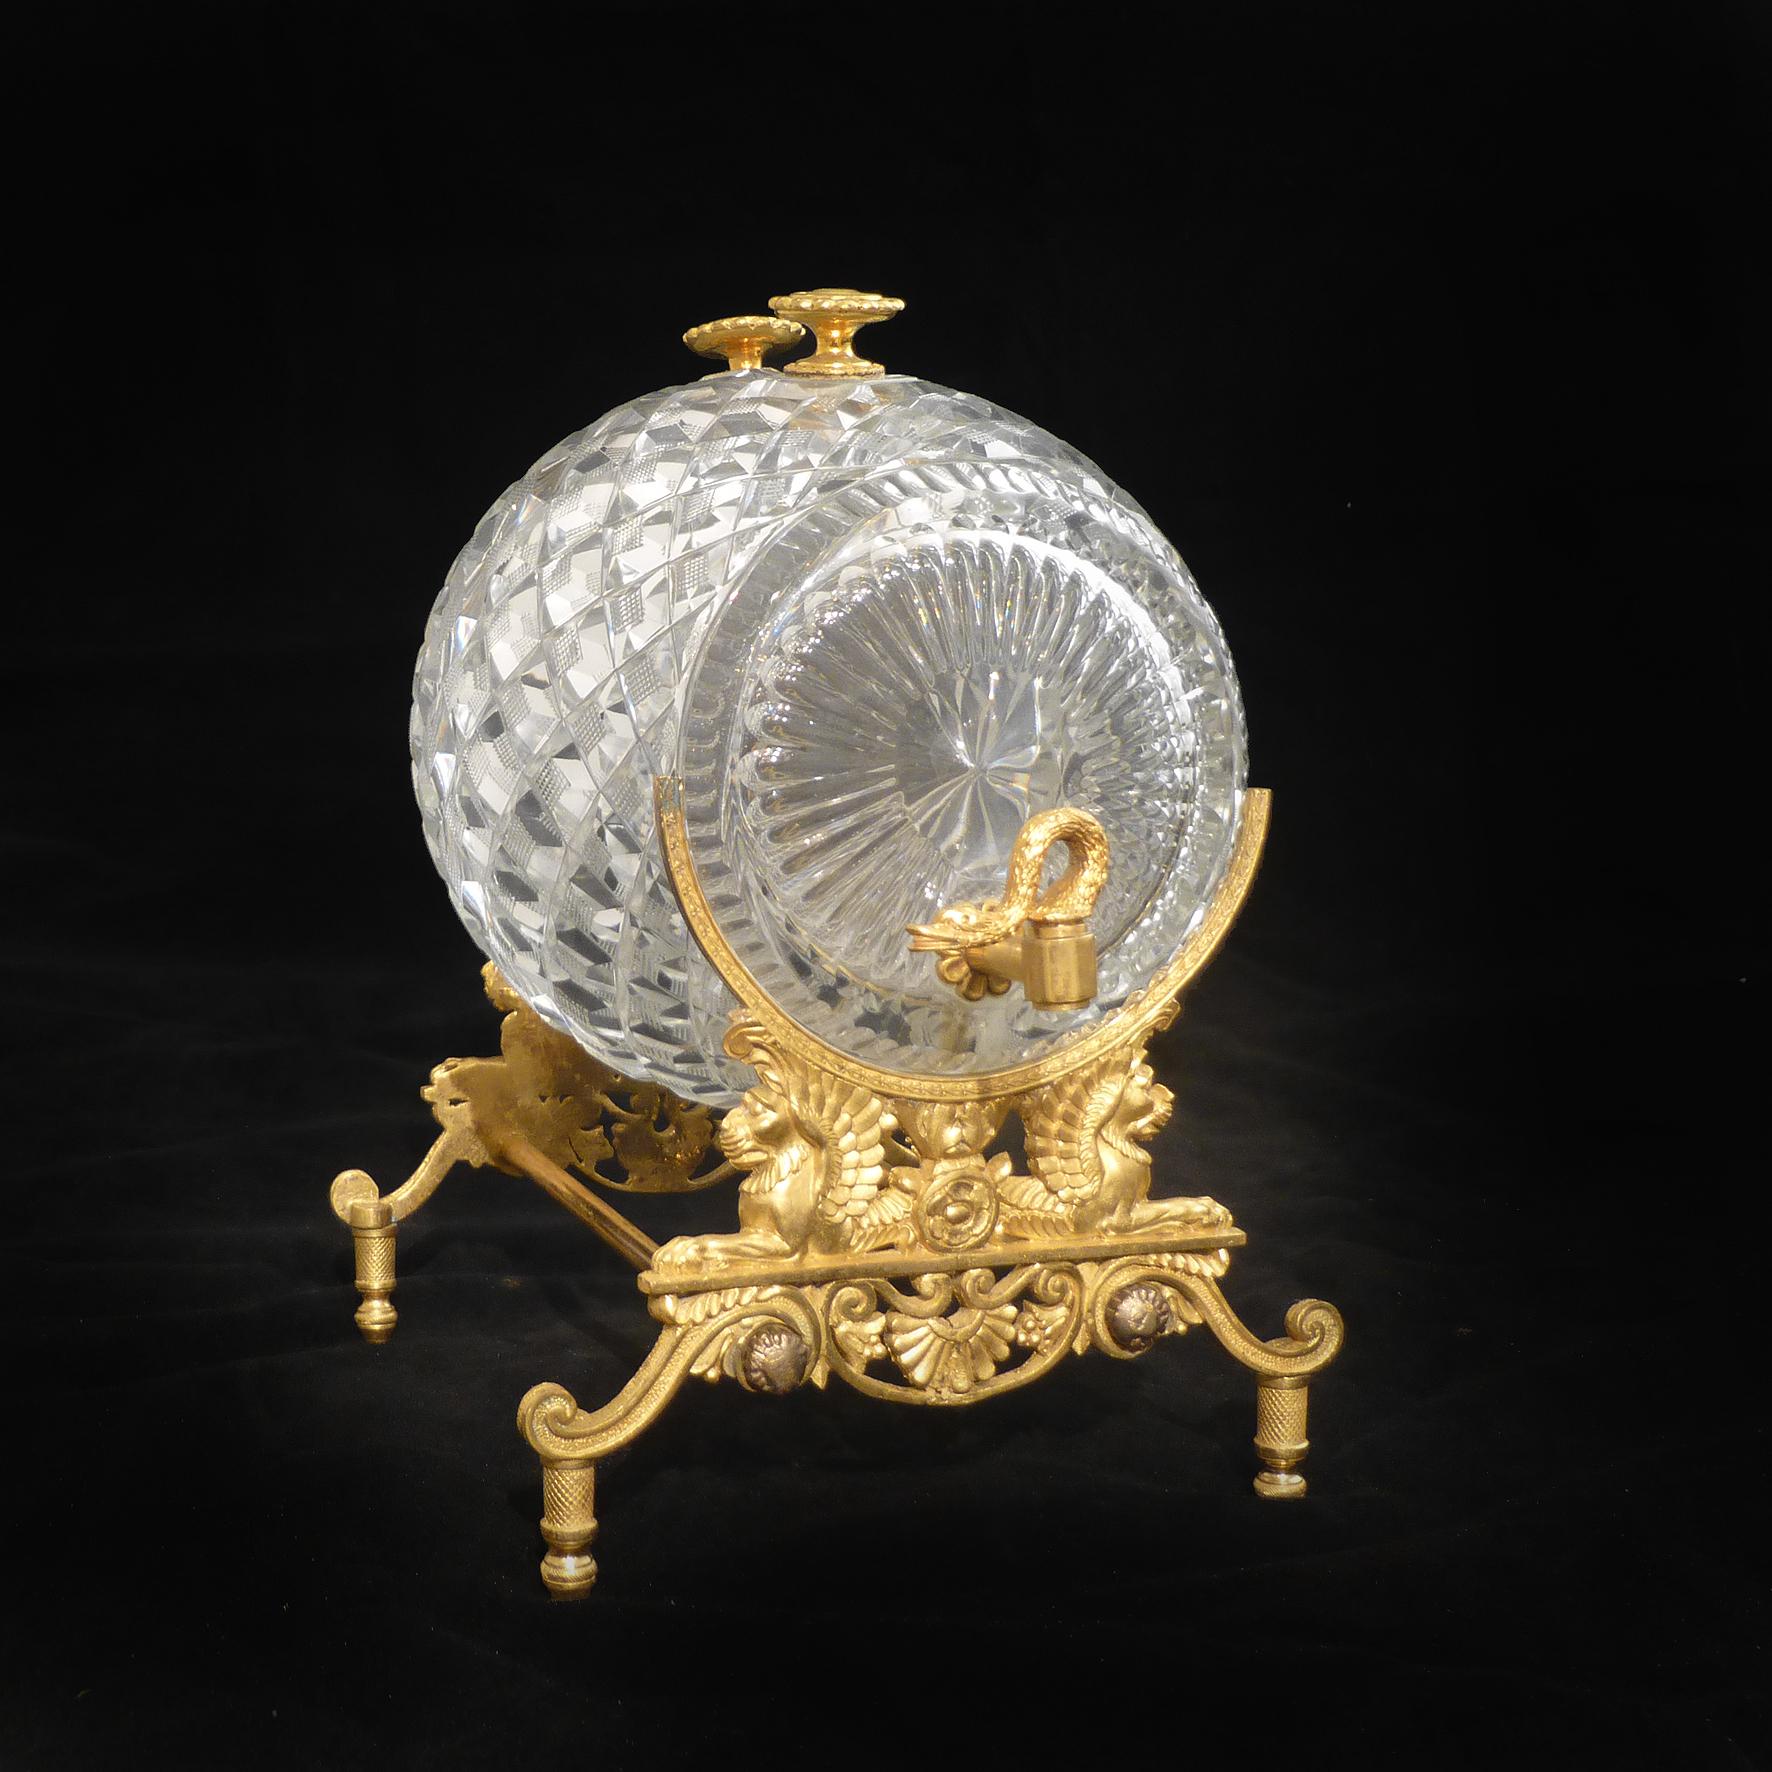 An unusual Charles X crystal and gilt-bronze spirit or perfume dispenser, in the shape of a barrel with swan head taps,

French, circa 1830.